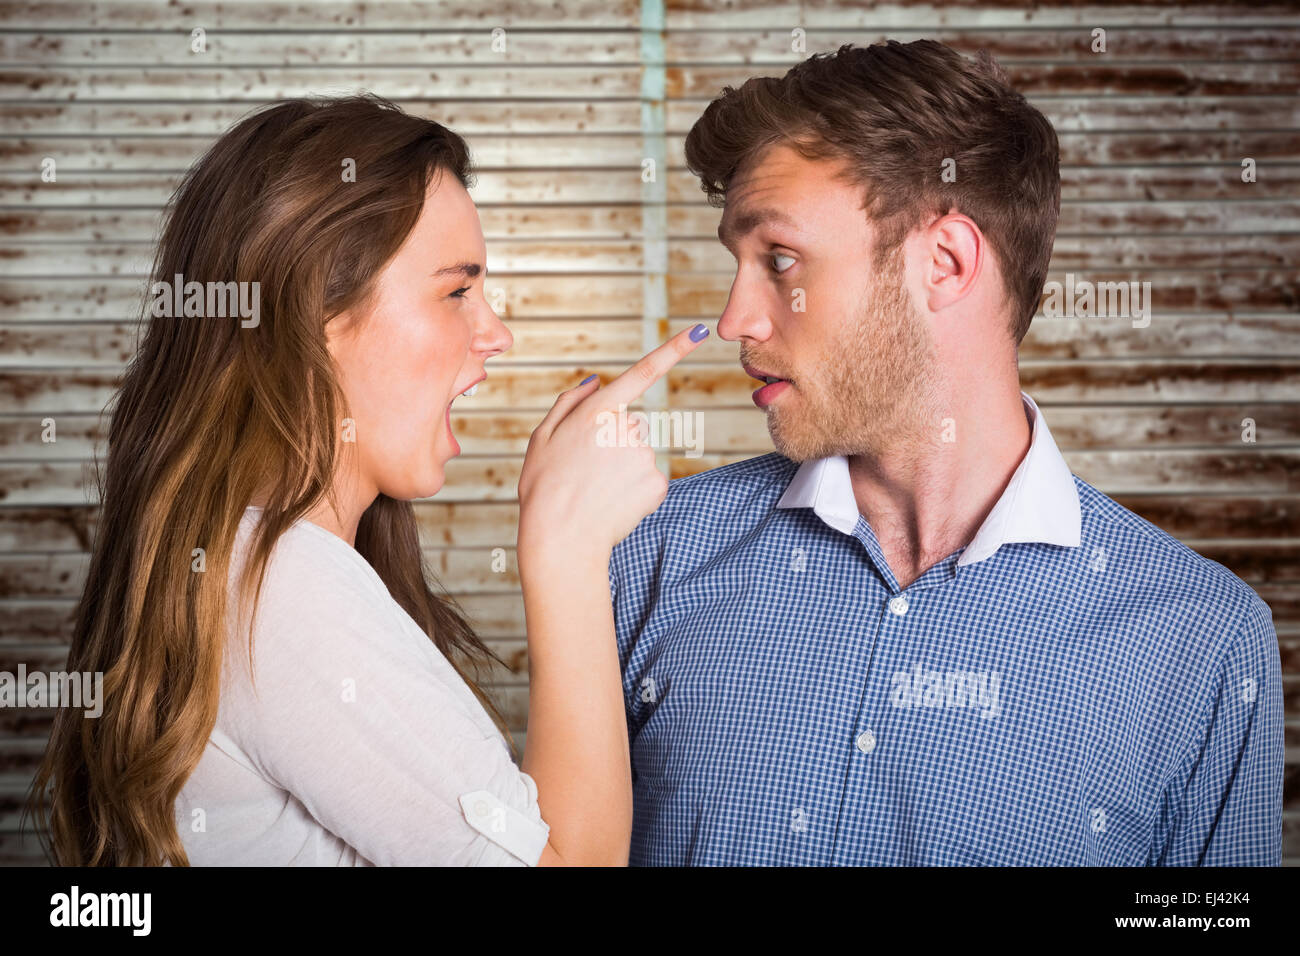 Composite image of casual young couple in an argument Stock Photo